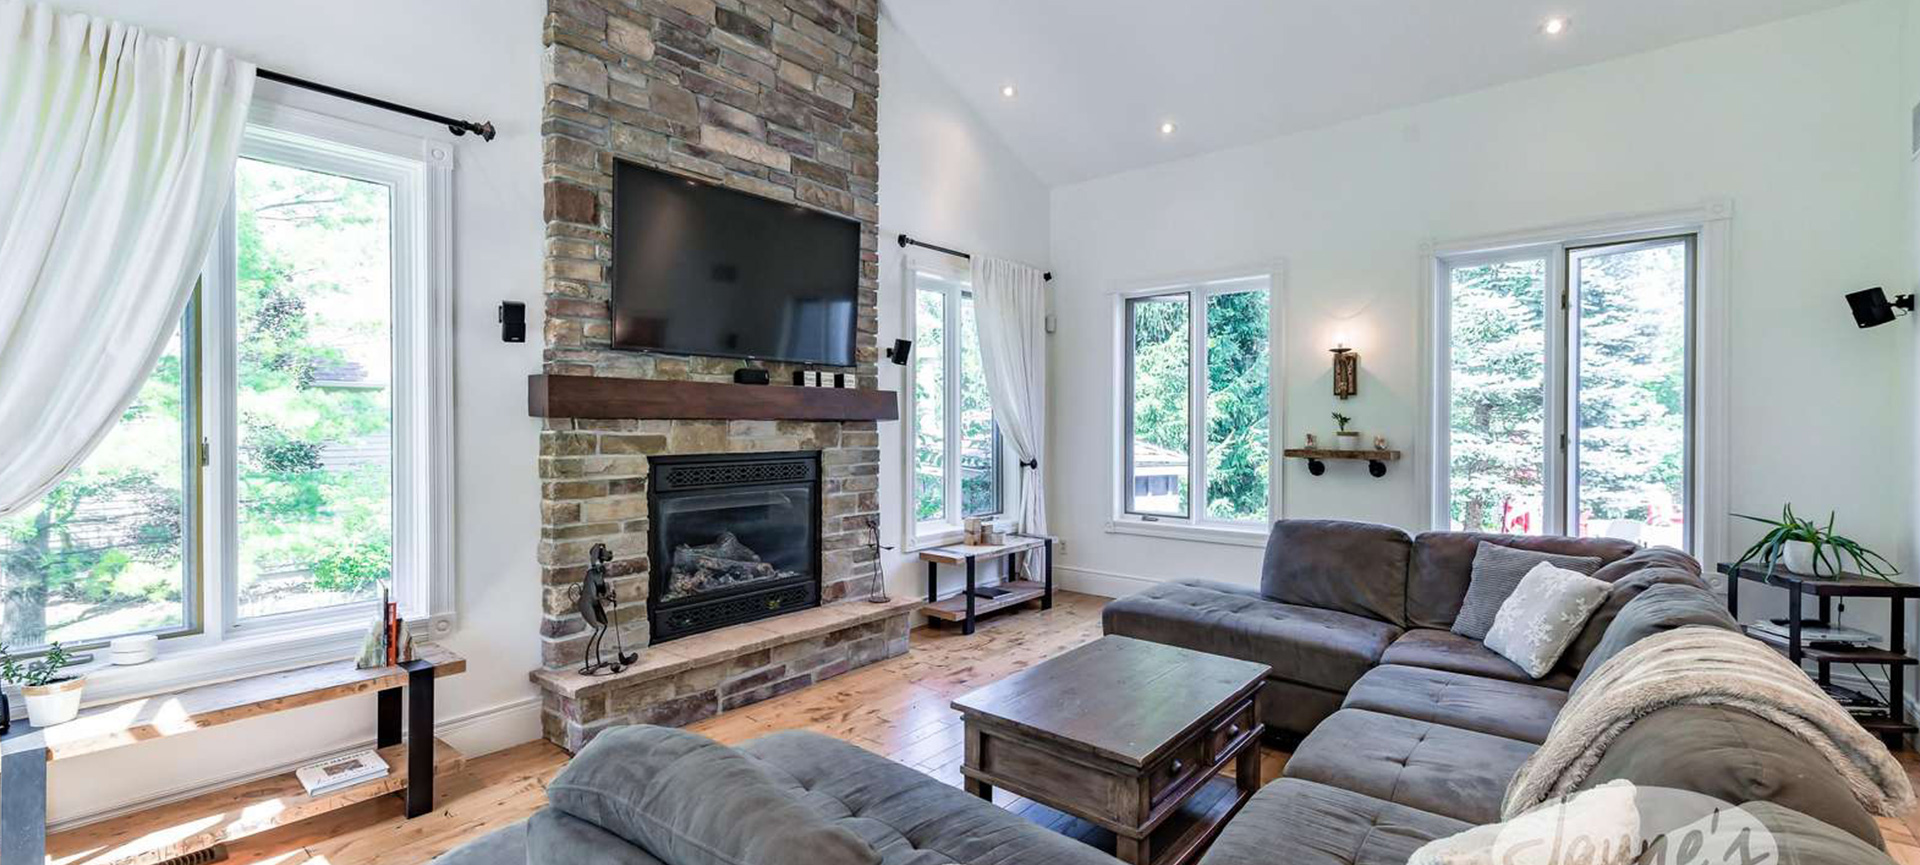 Inviting living room with fireplace and panoramic lake views at Jayne's Luxurious Rentals property.